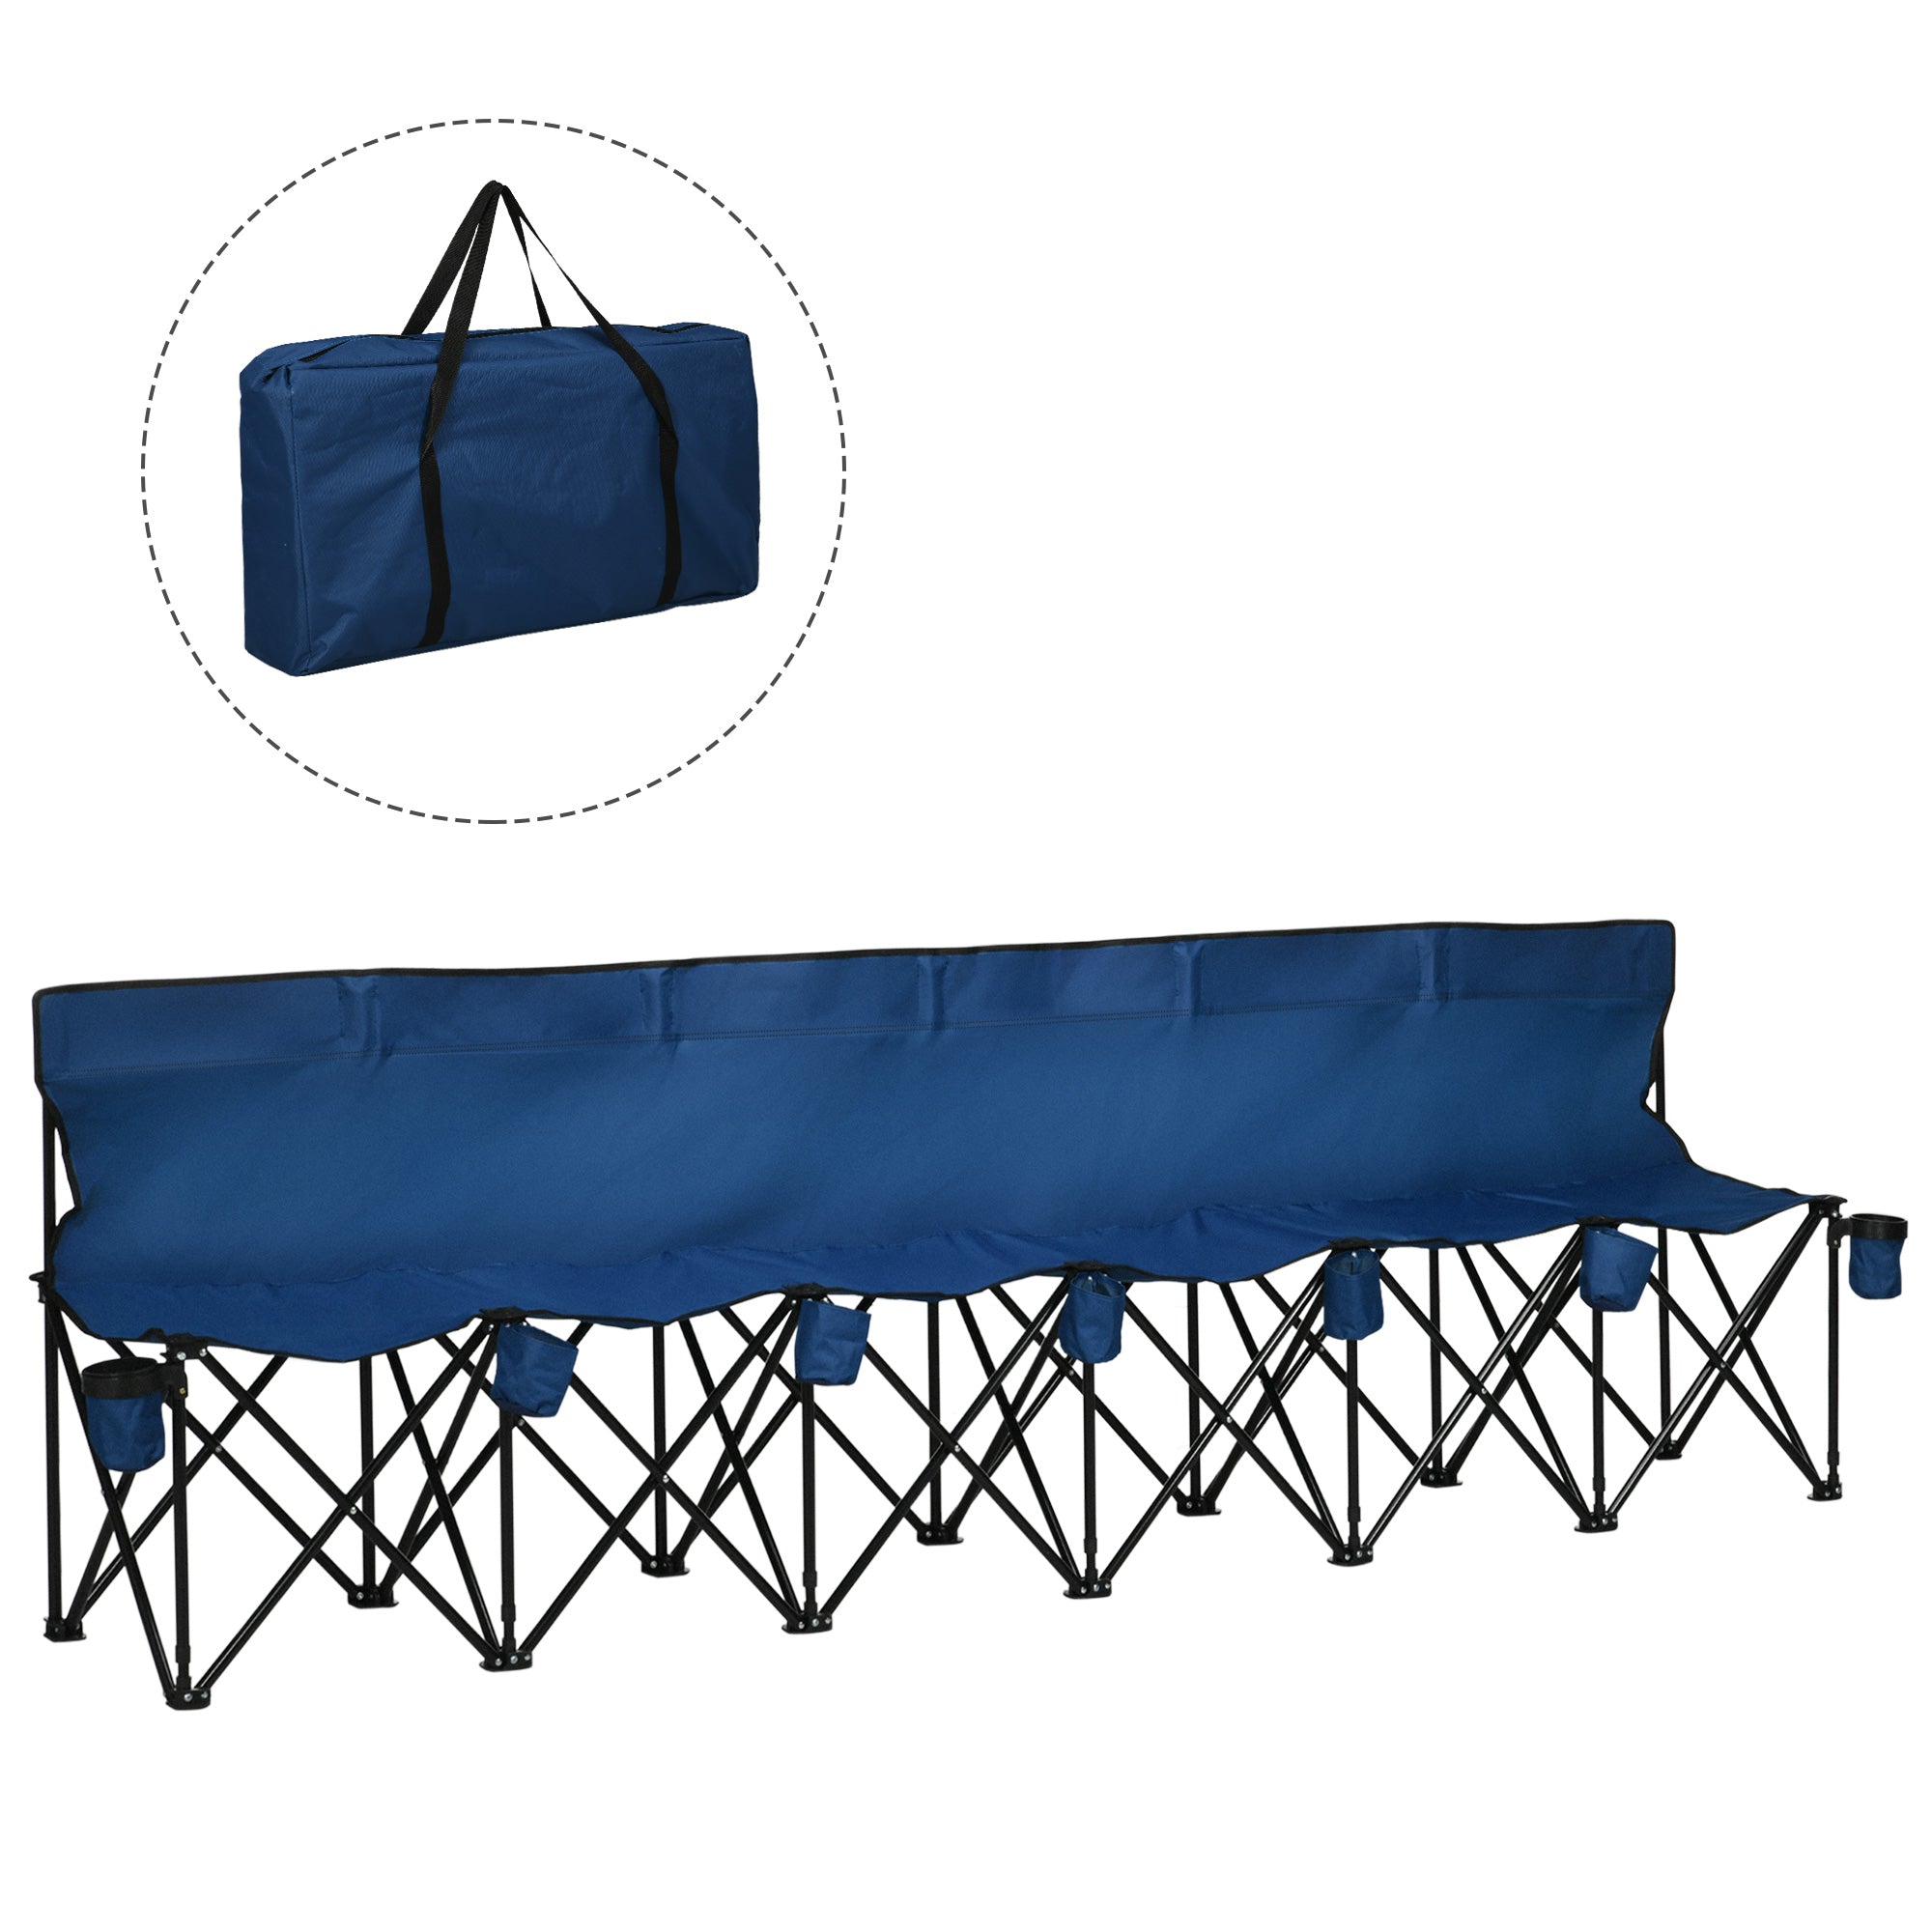 6 Seater Folding Sports Bench Outdoor Picnic Camping Portable Spectator Chair Steel Frame w/ Cup Holder & Carry Bag - Blue-0